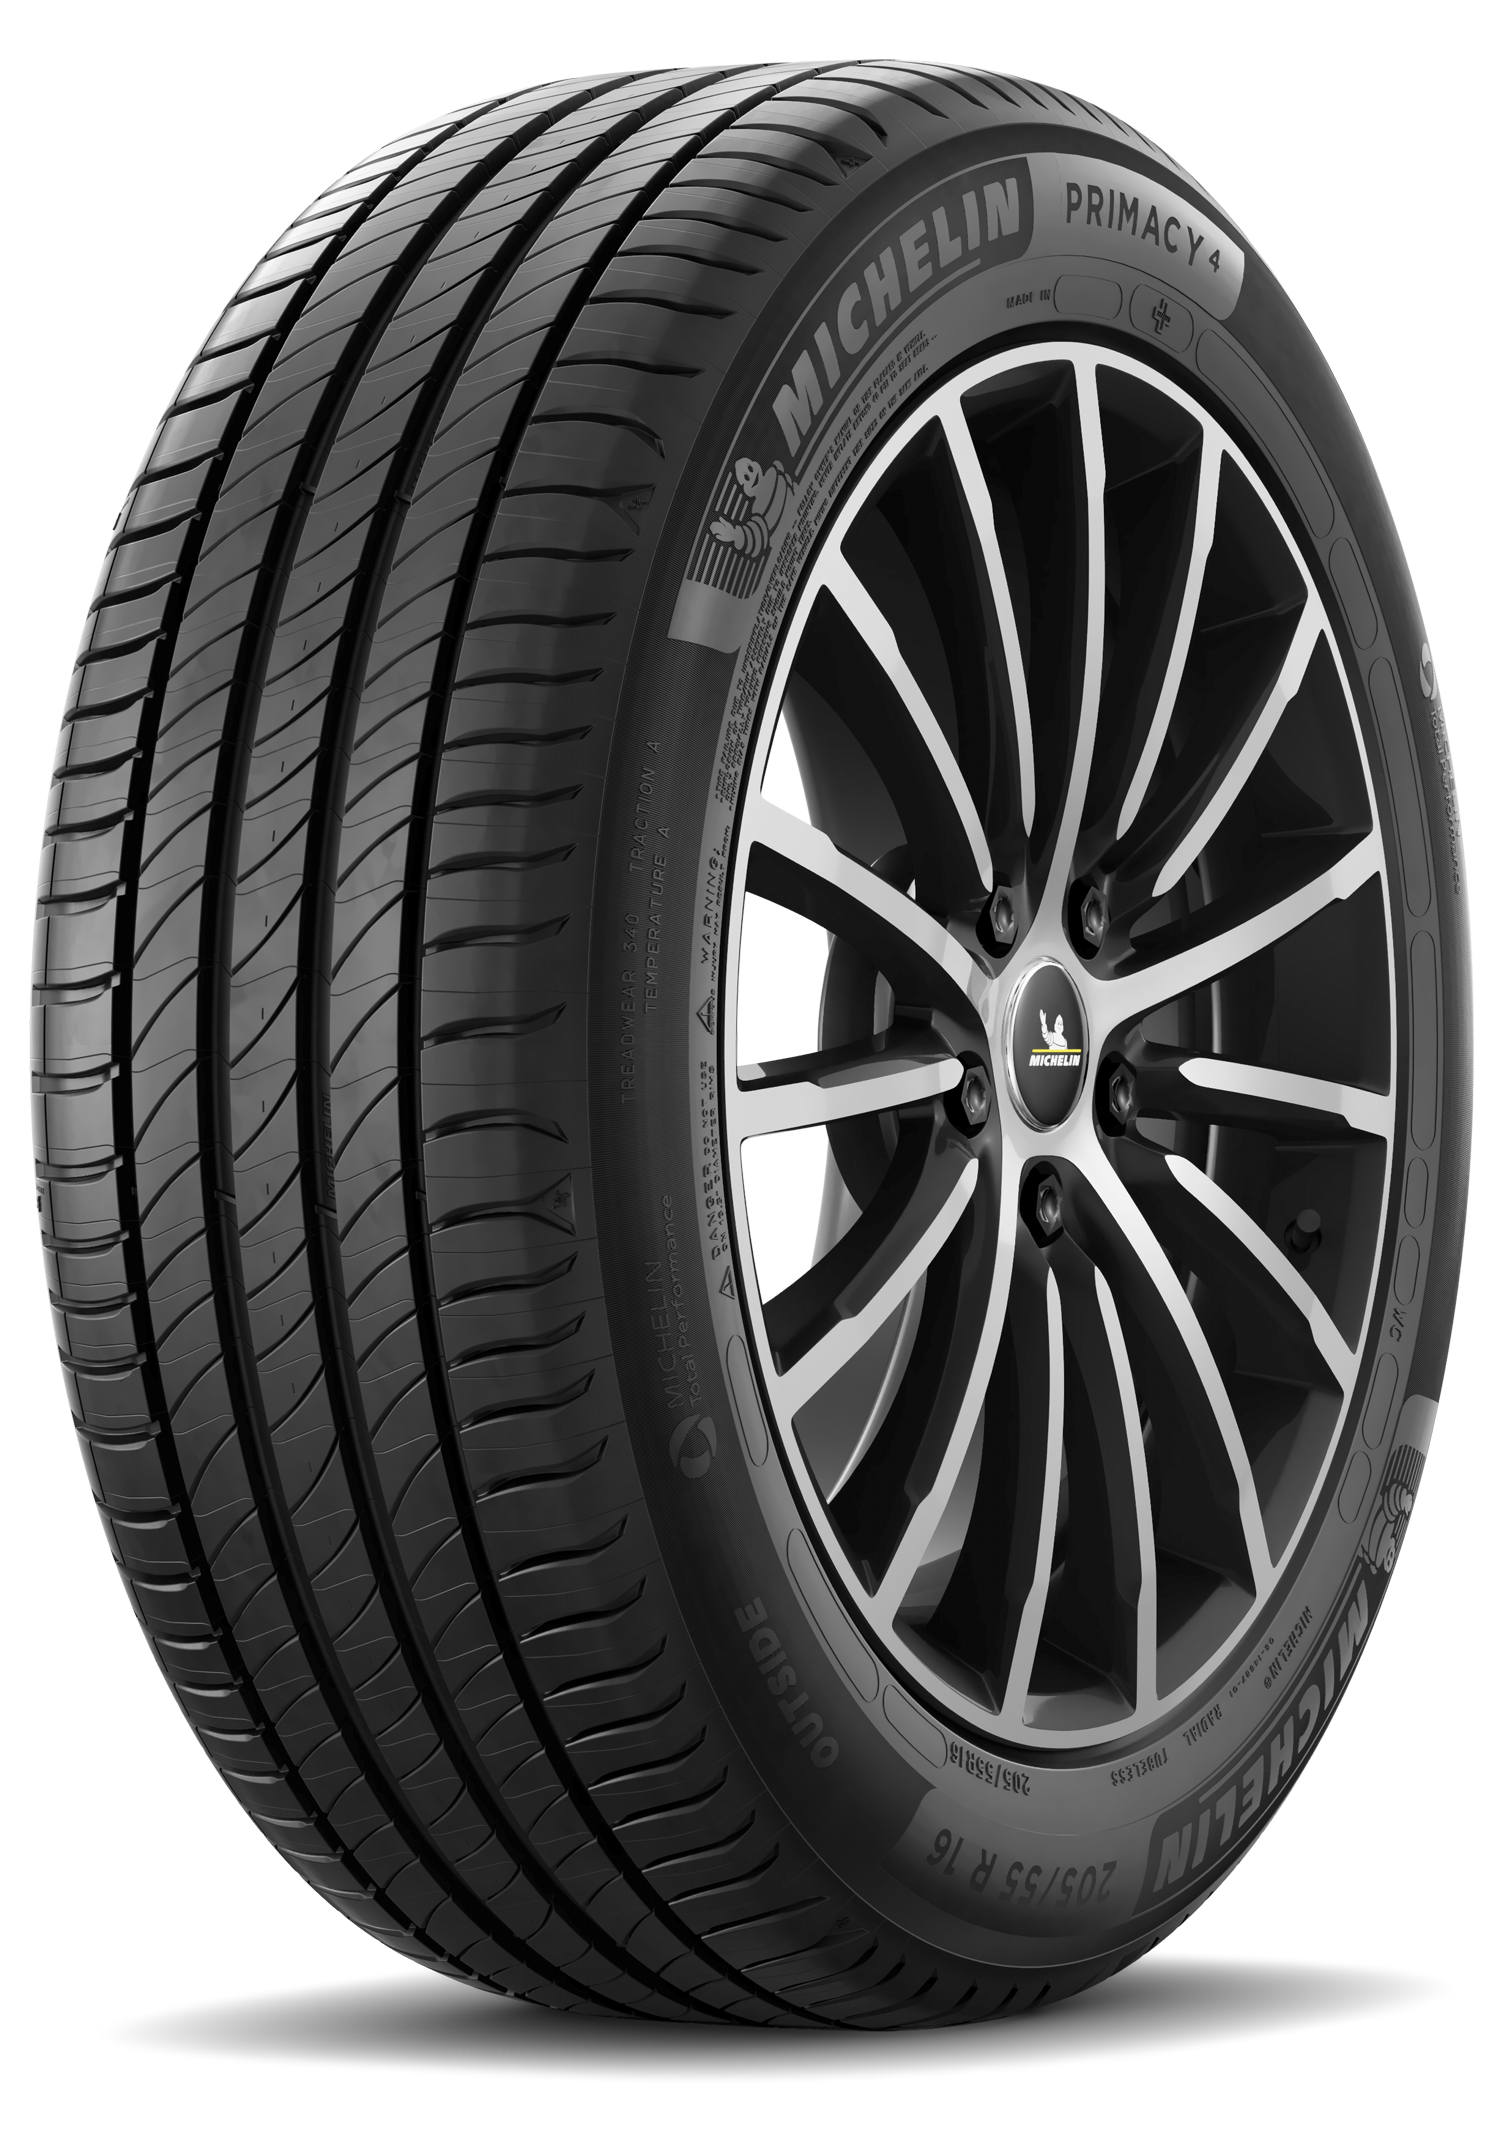 Michelin Primacy 4 Plus - Tire Reviews and Tests